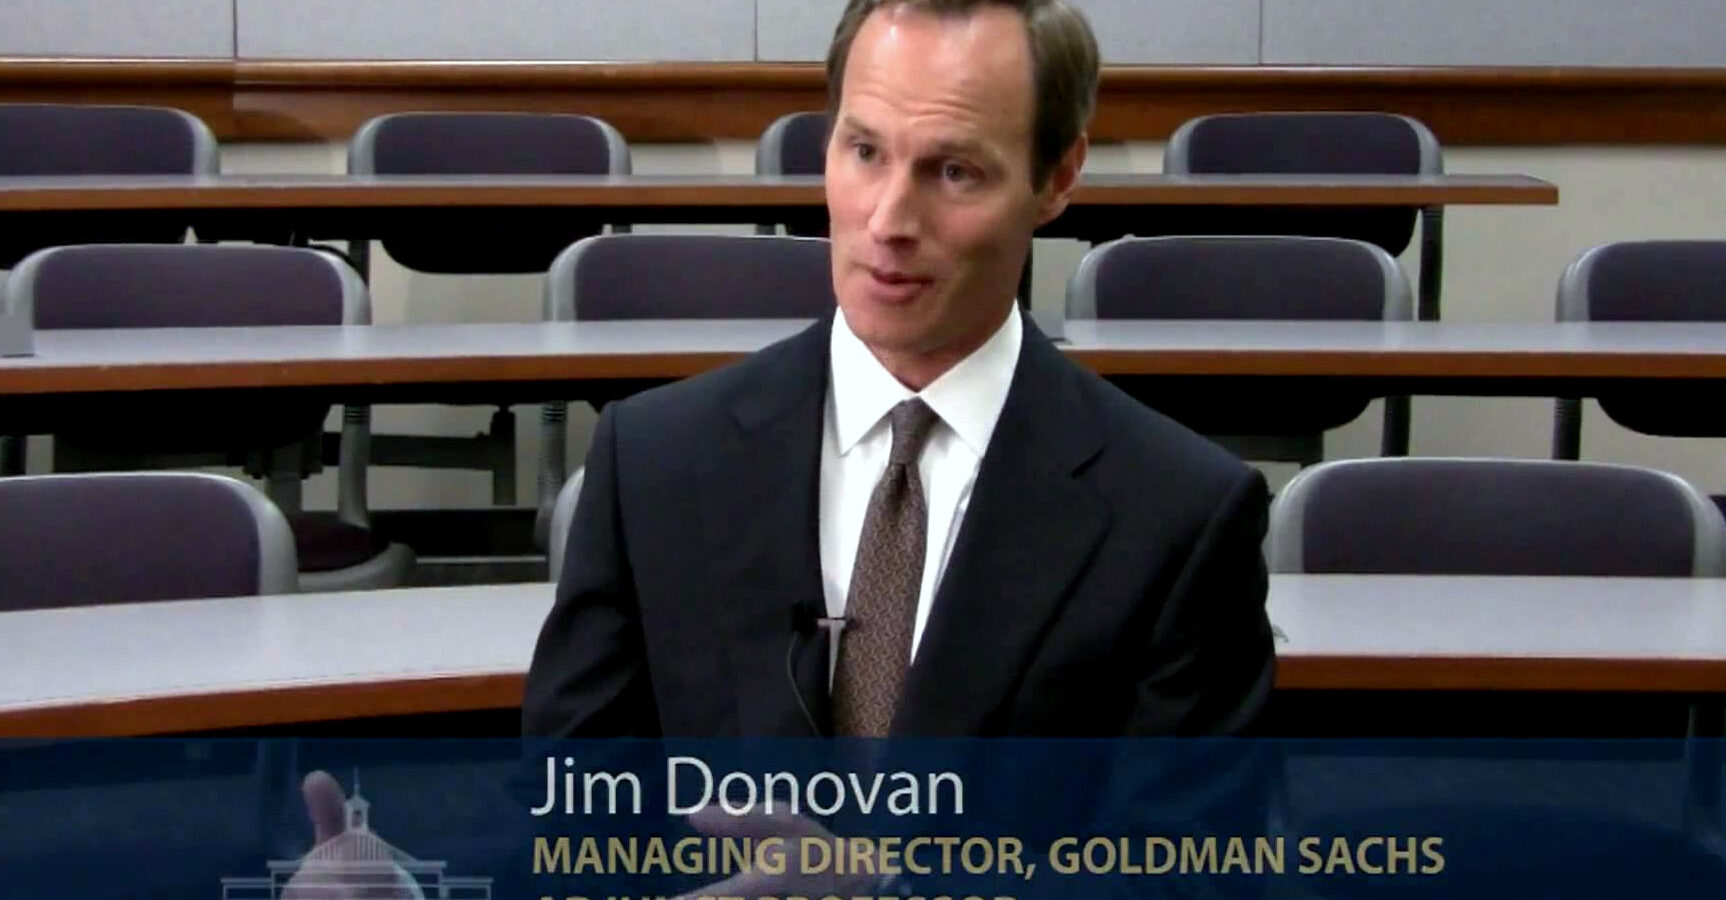 If confirmed, James Donovan would be the sixth member of President Donald Trump's administration with ties to Goldman Sachs.